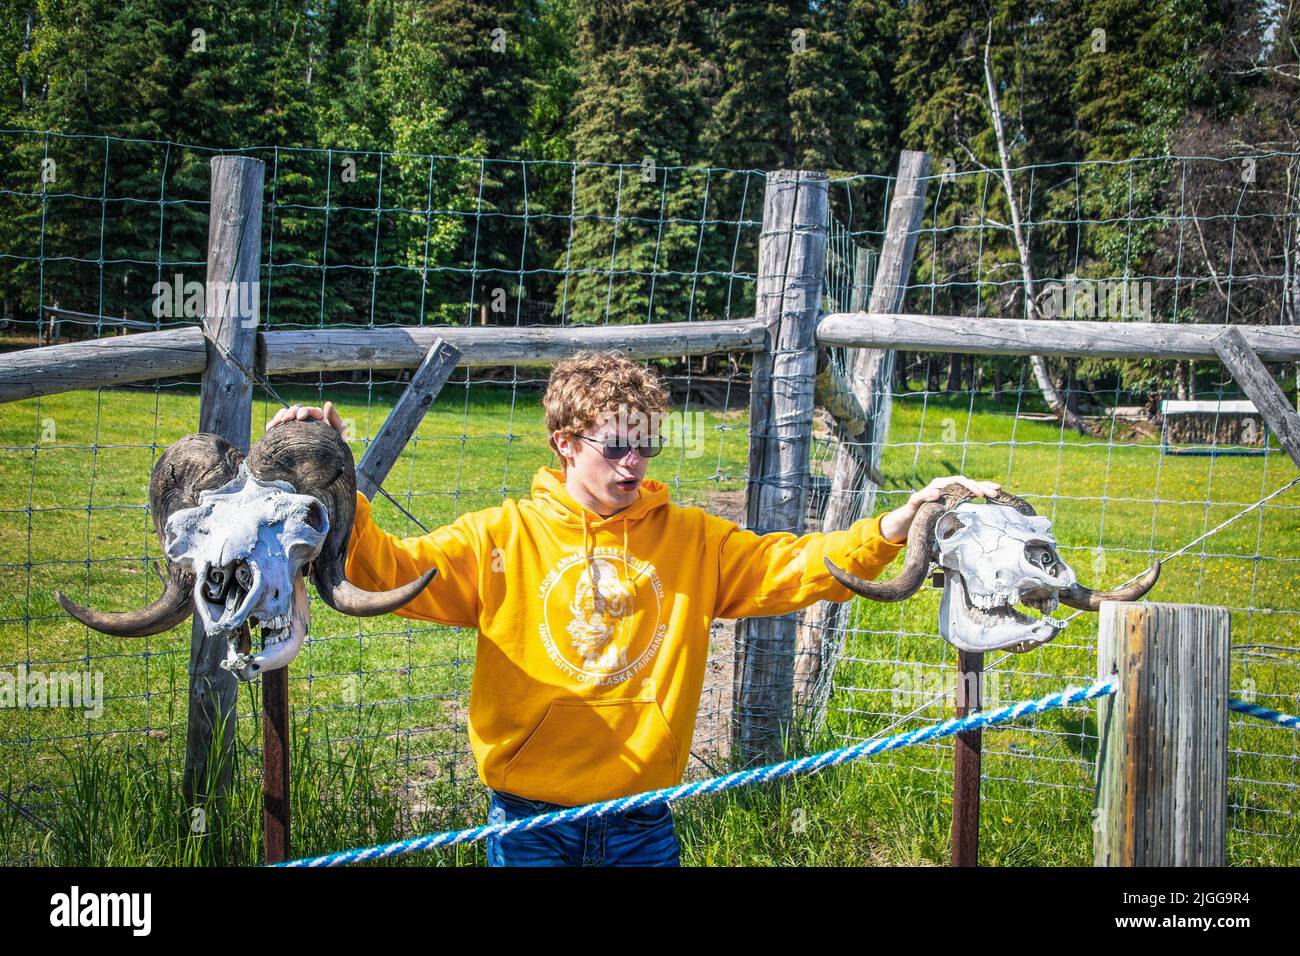 06-21-2022 Fairbanks Alaska USA Young man in sunglasses and curly hair with hand on two musk oxen skull- male and female during tour at Large Animal R Stock Photo